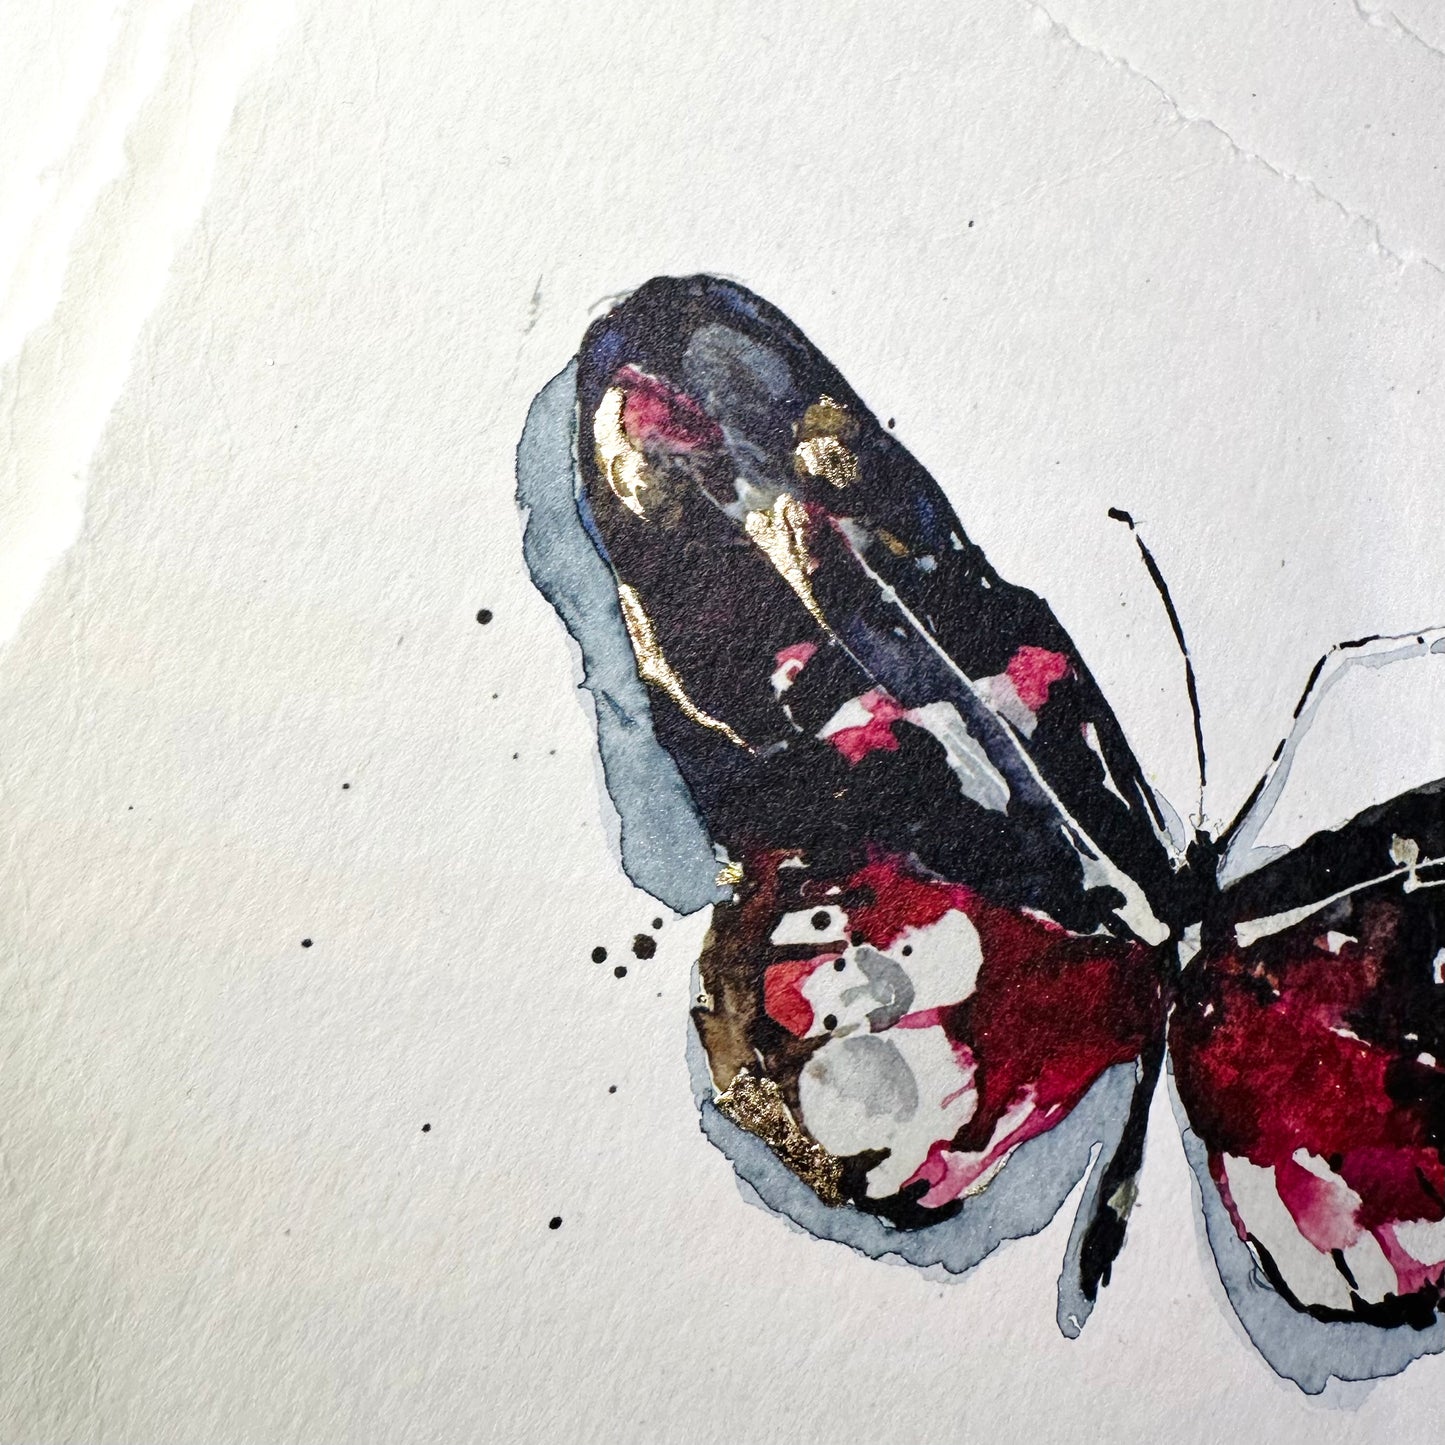 Hand Embellished Print - Pink/Maroon Butterfly